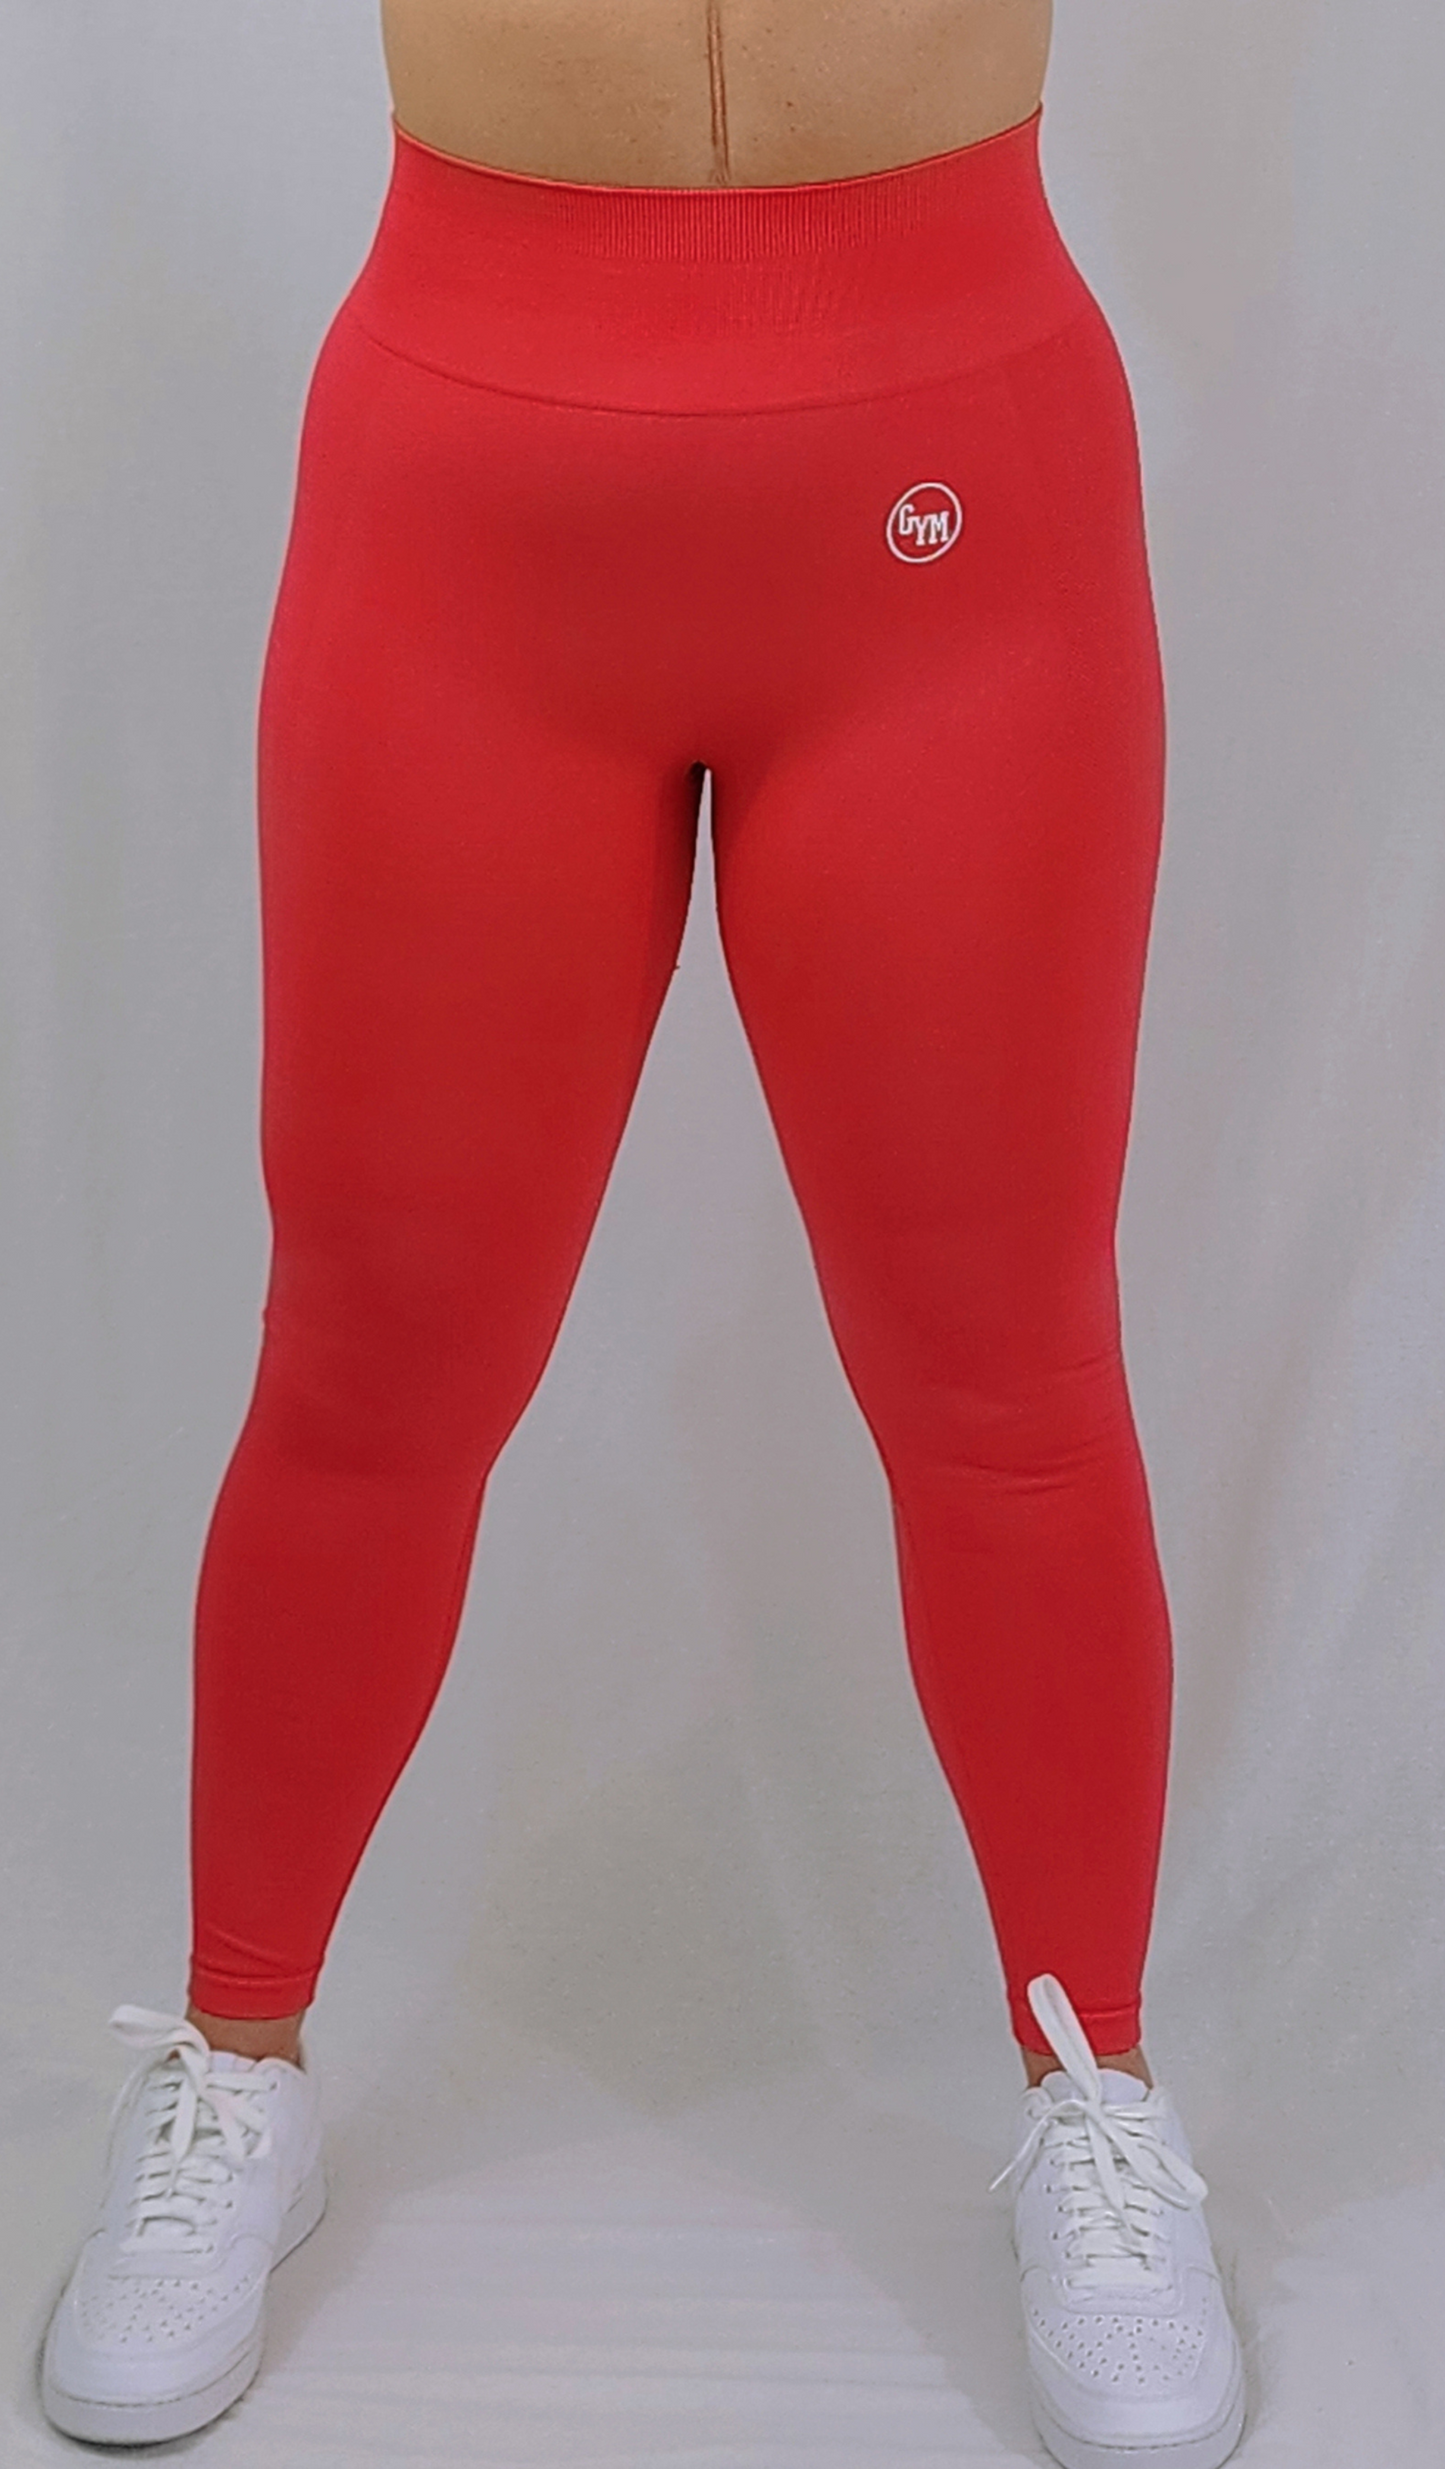 Gym Brand Apparel red leggings front view.